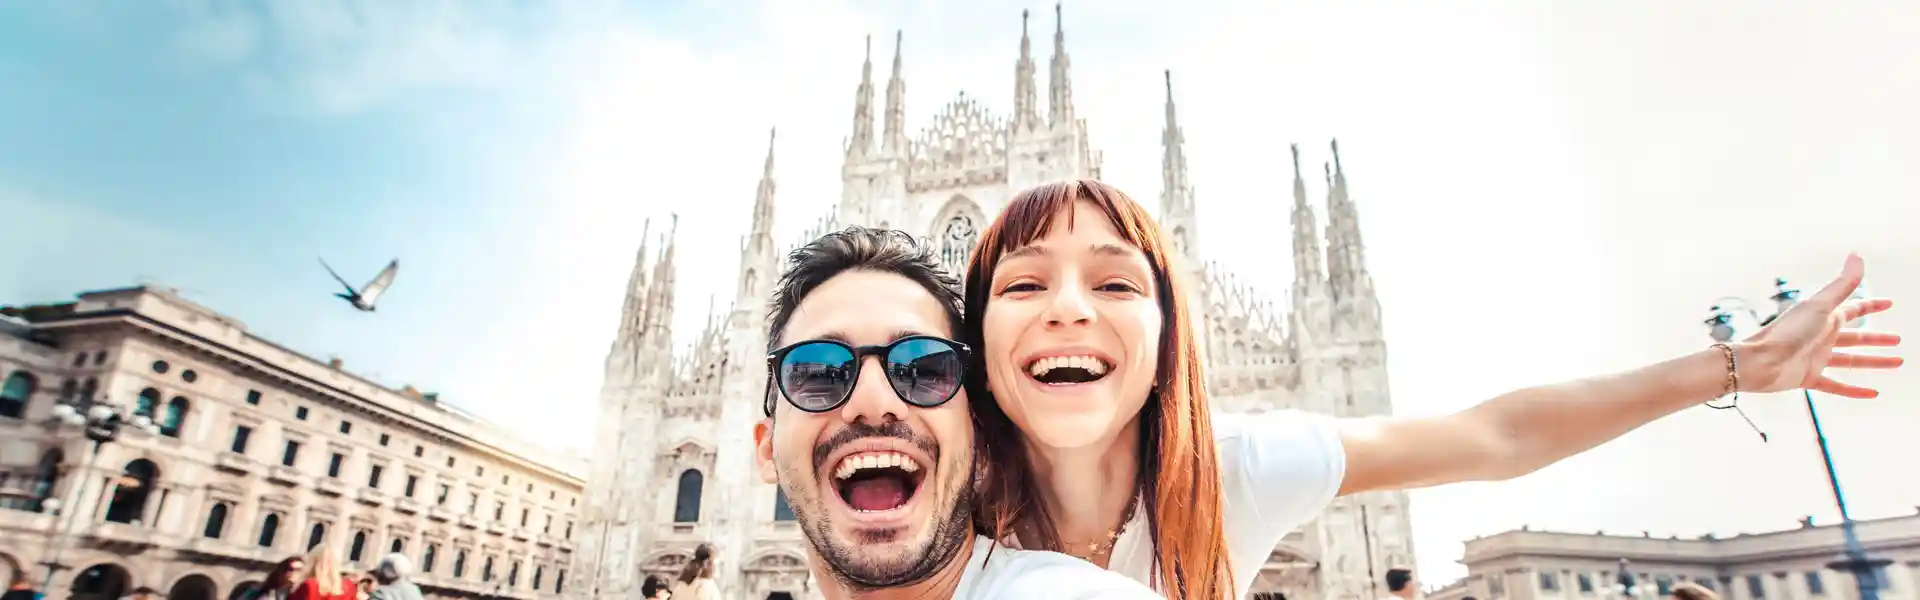 happy-couple-taking-selfie-in-front-of-duomo-cathedral-in